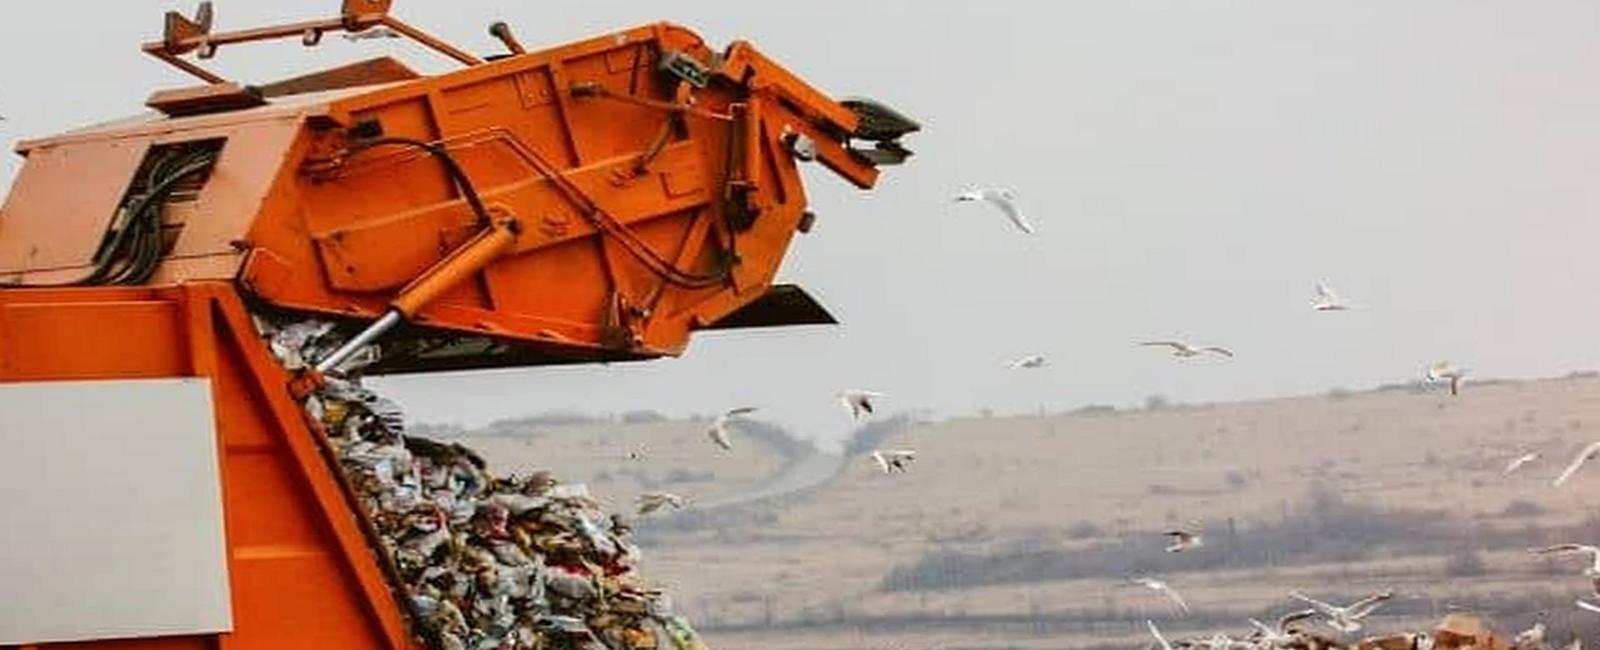 Benefits Of Commercial Waste Disposal Services